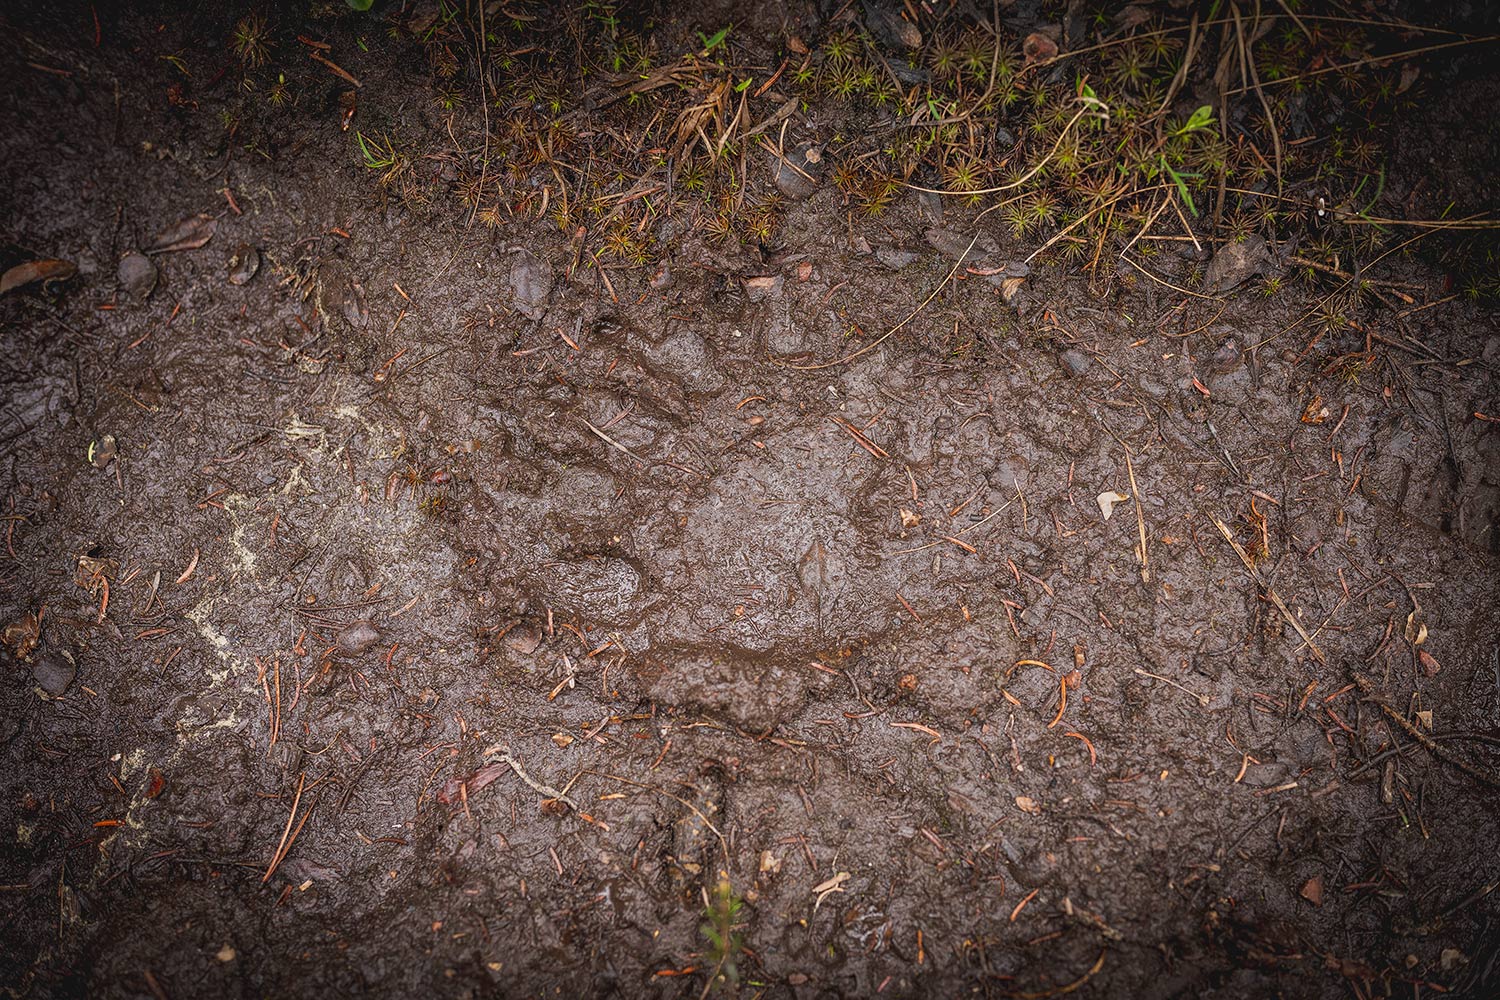 Grizzly print in mud